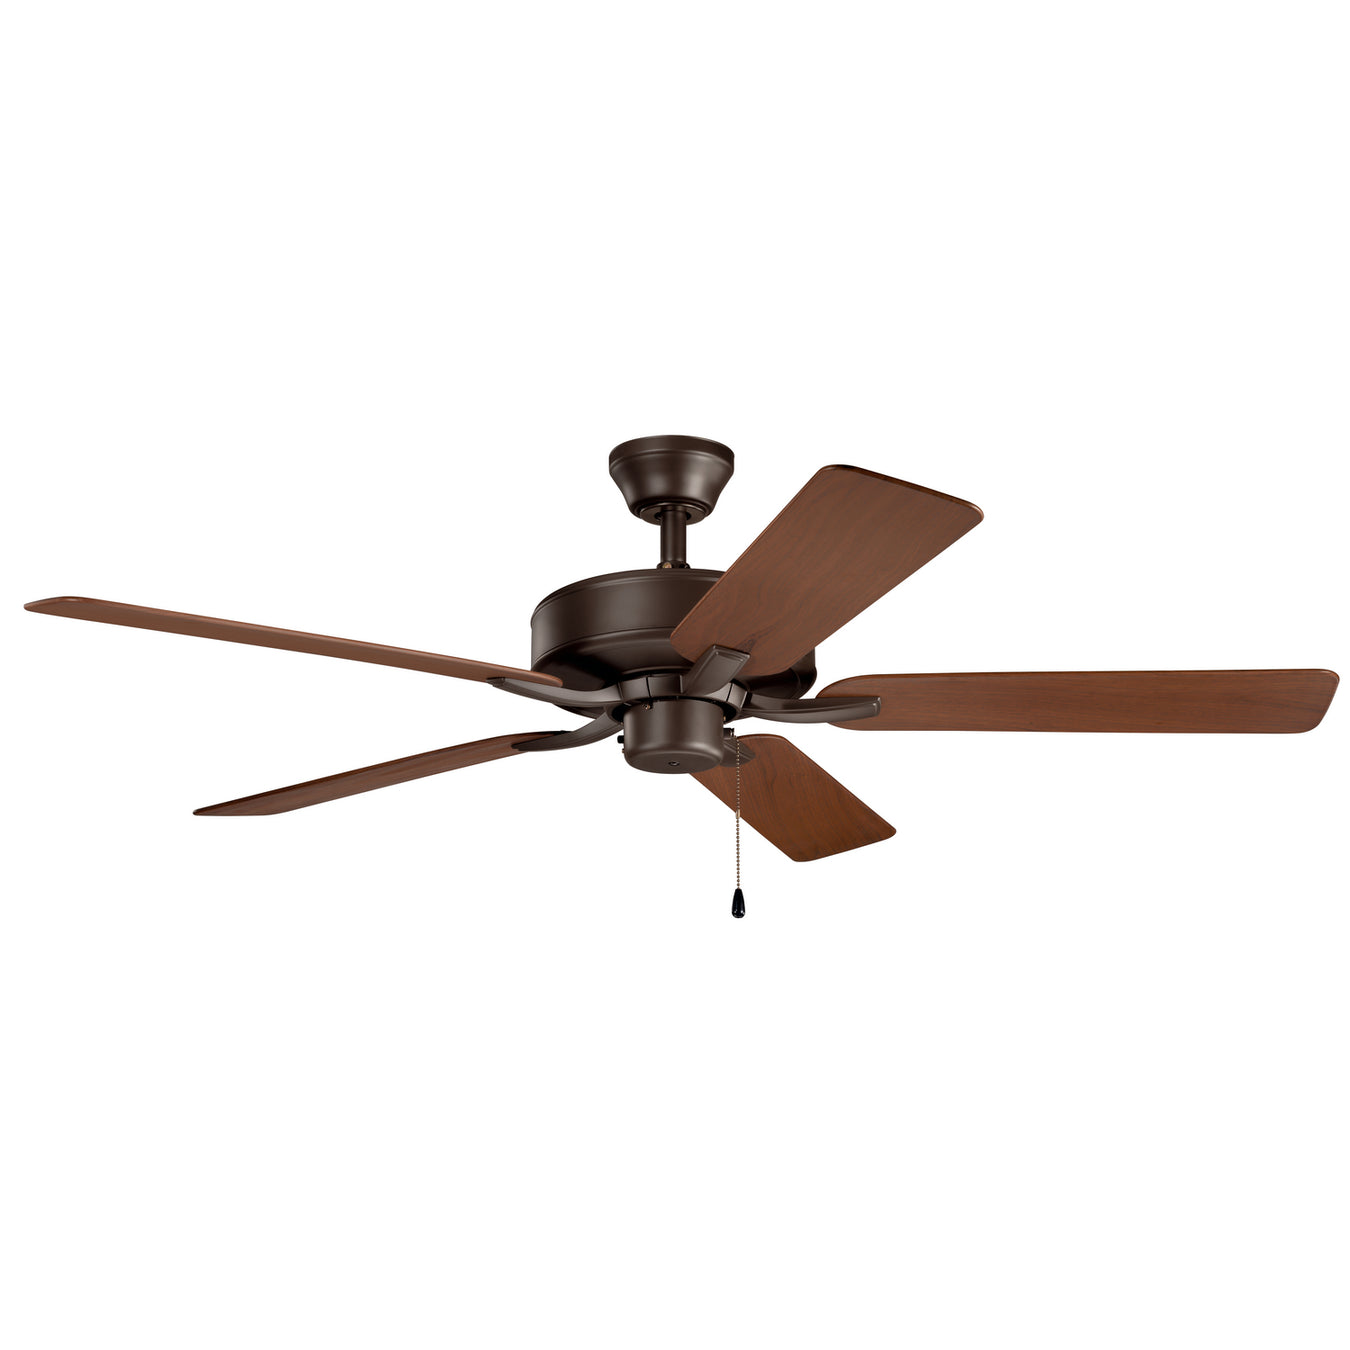 Basics Pro 52" Patio Ceiling Fan in Satin Natural Bronze from Kichler Lighting, item number 330015SNB